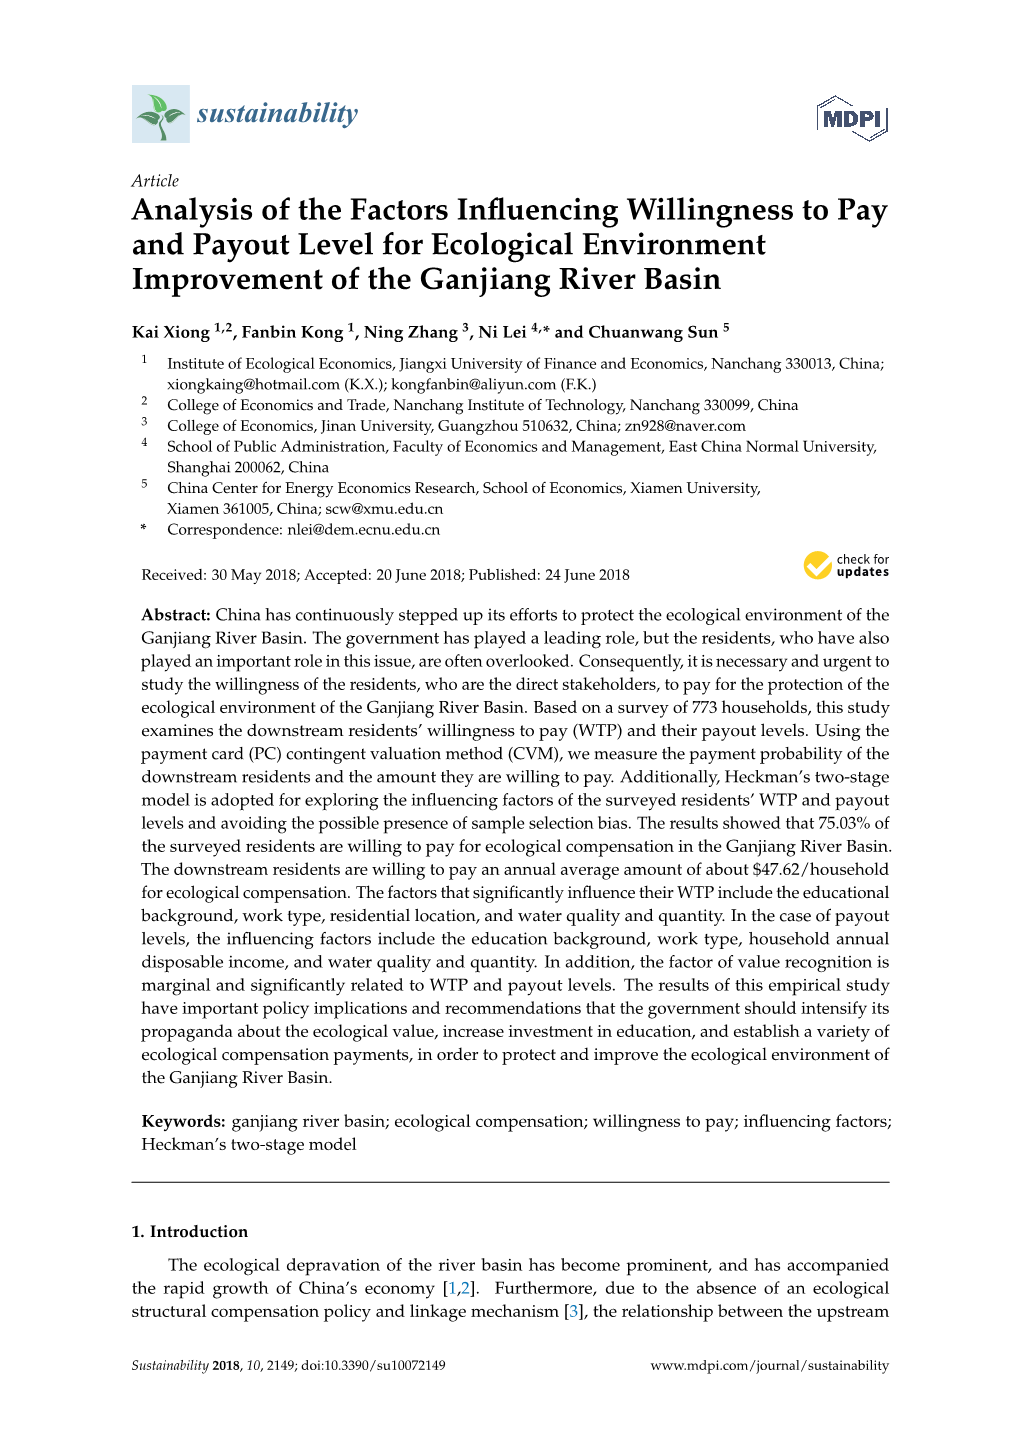 Analysis of the Factors Influencing Willingness to Pay and Payout Level for Ecological Environment Improvement of the Ganjiang R